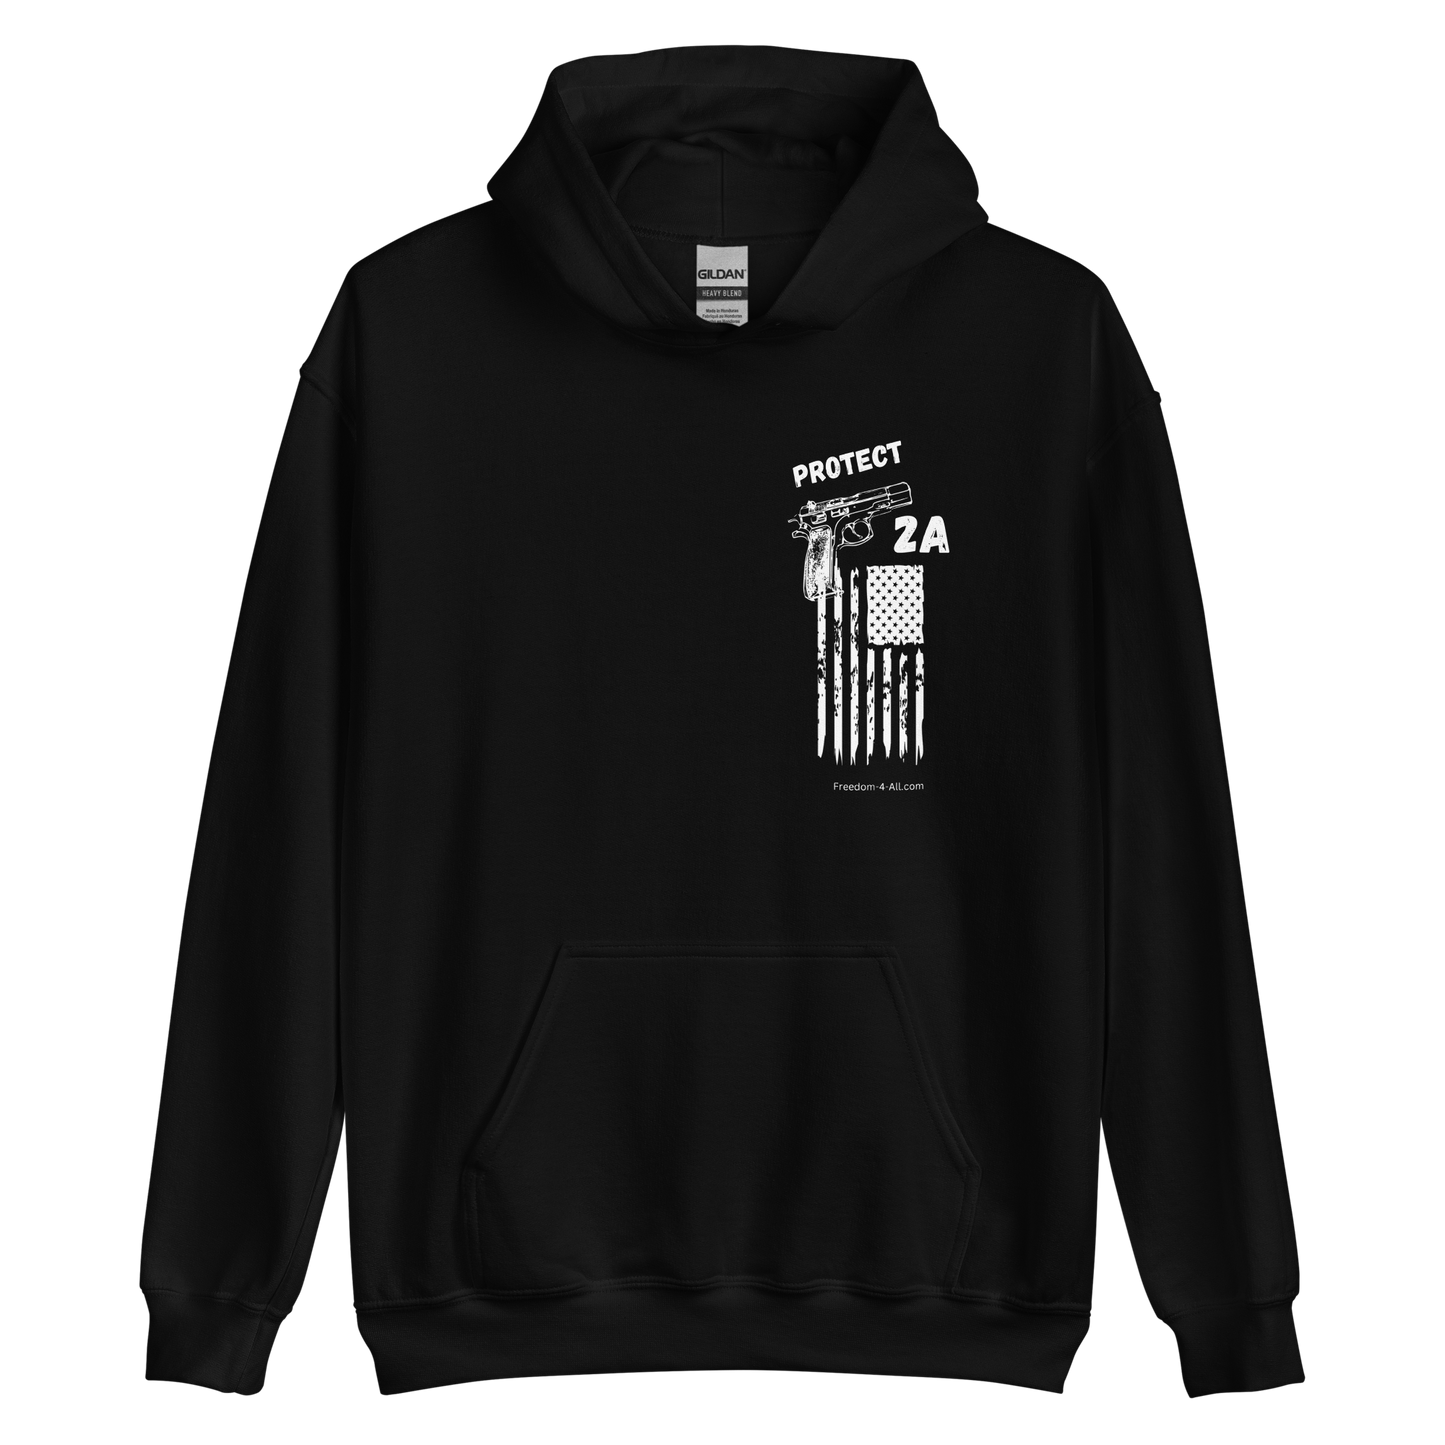 (2A-01) Protect 2A Unisex Hoodie